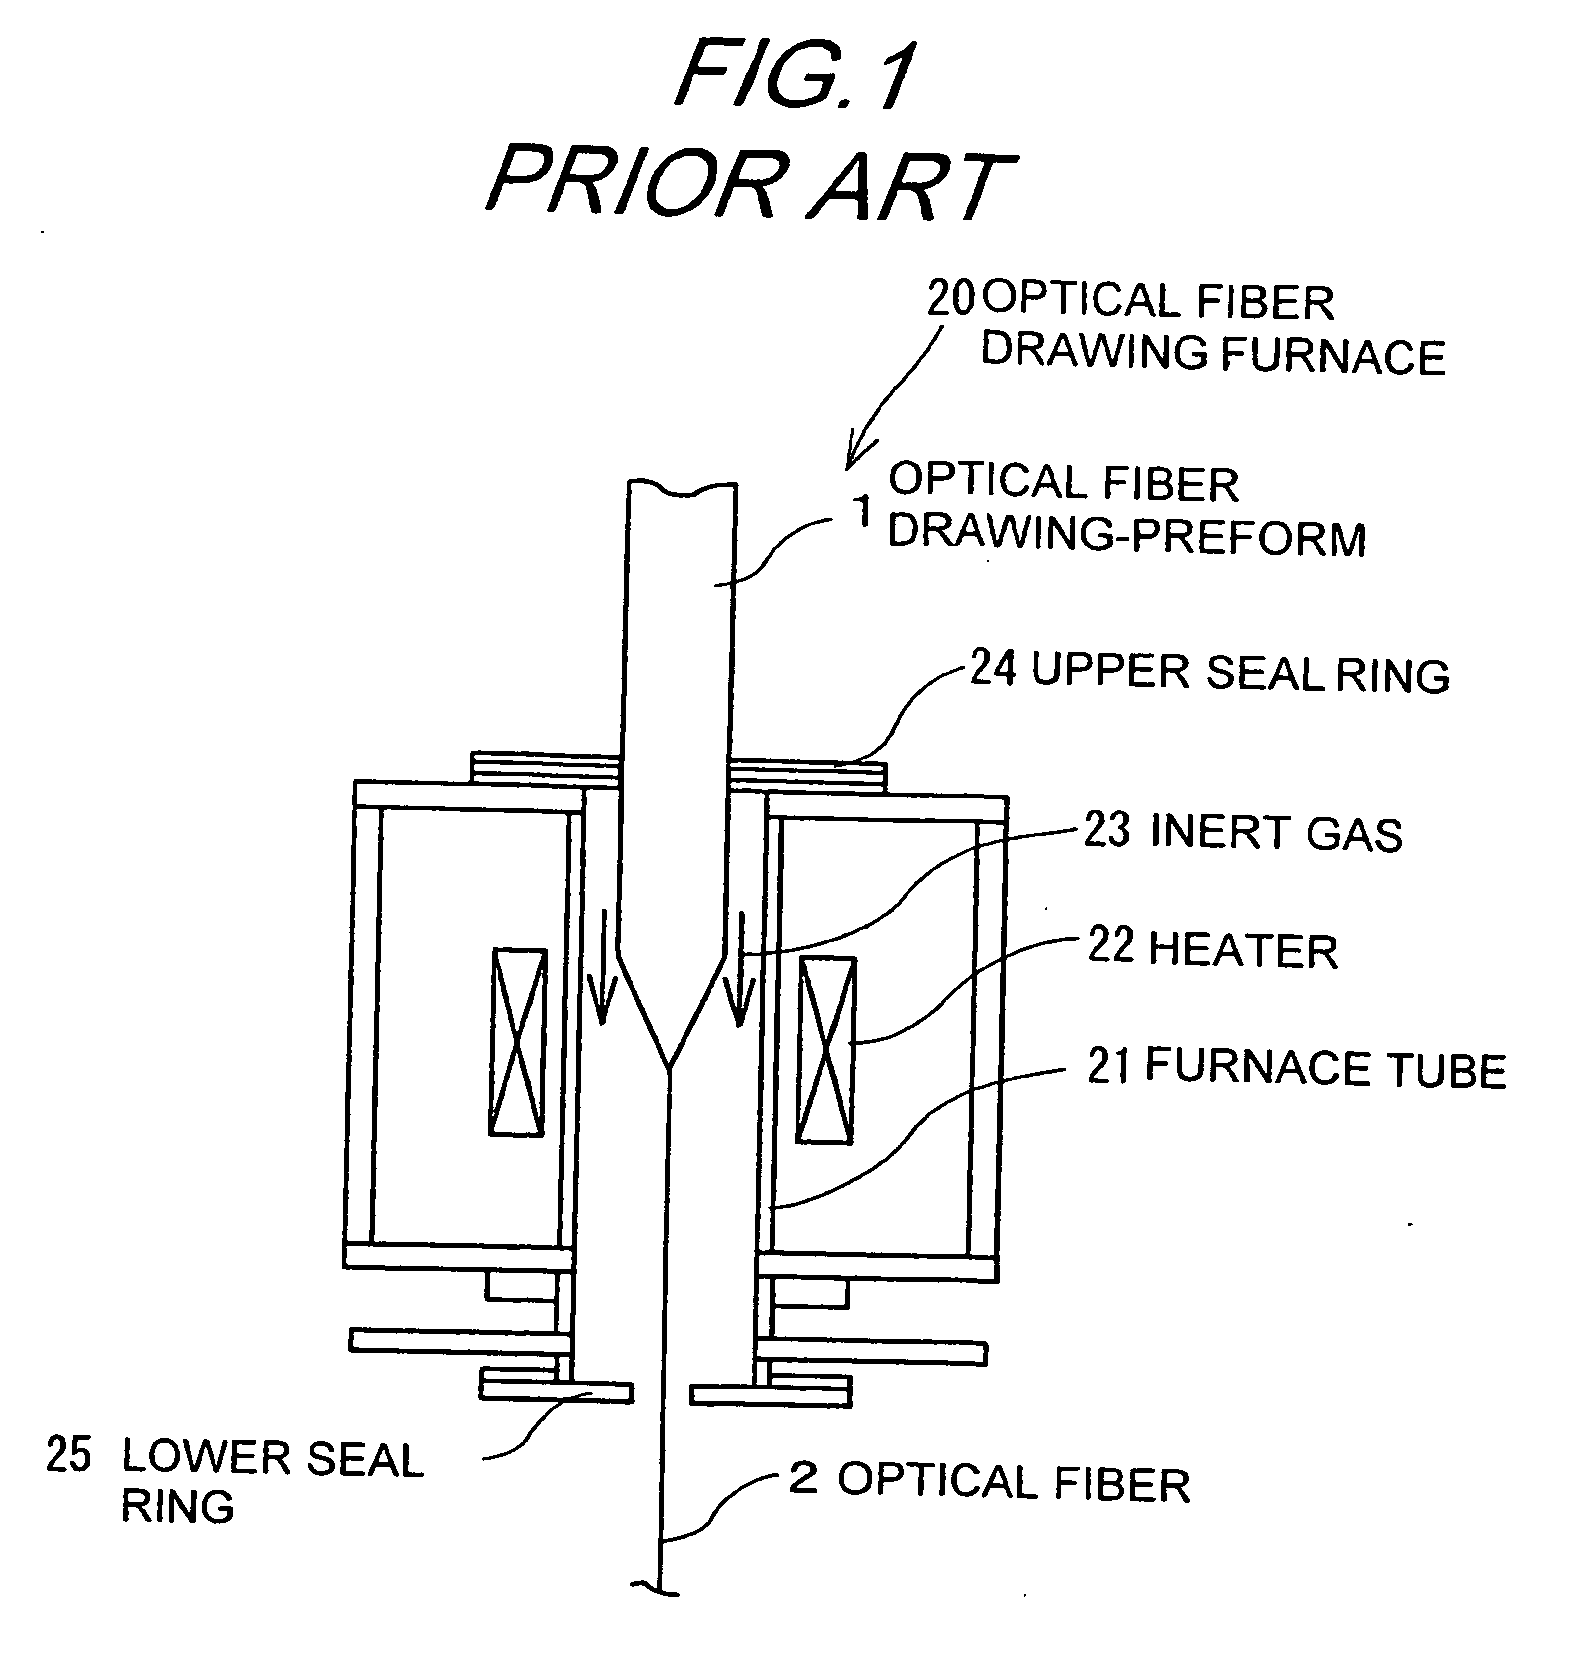 Optical fiber drawing apparatus, sealing mechanism for the same, and method for drawing an optical fiber